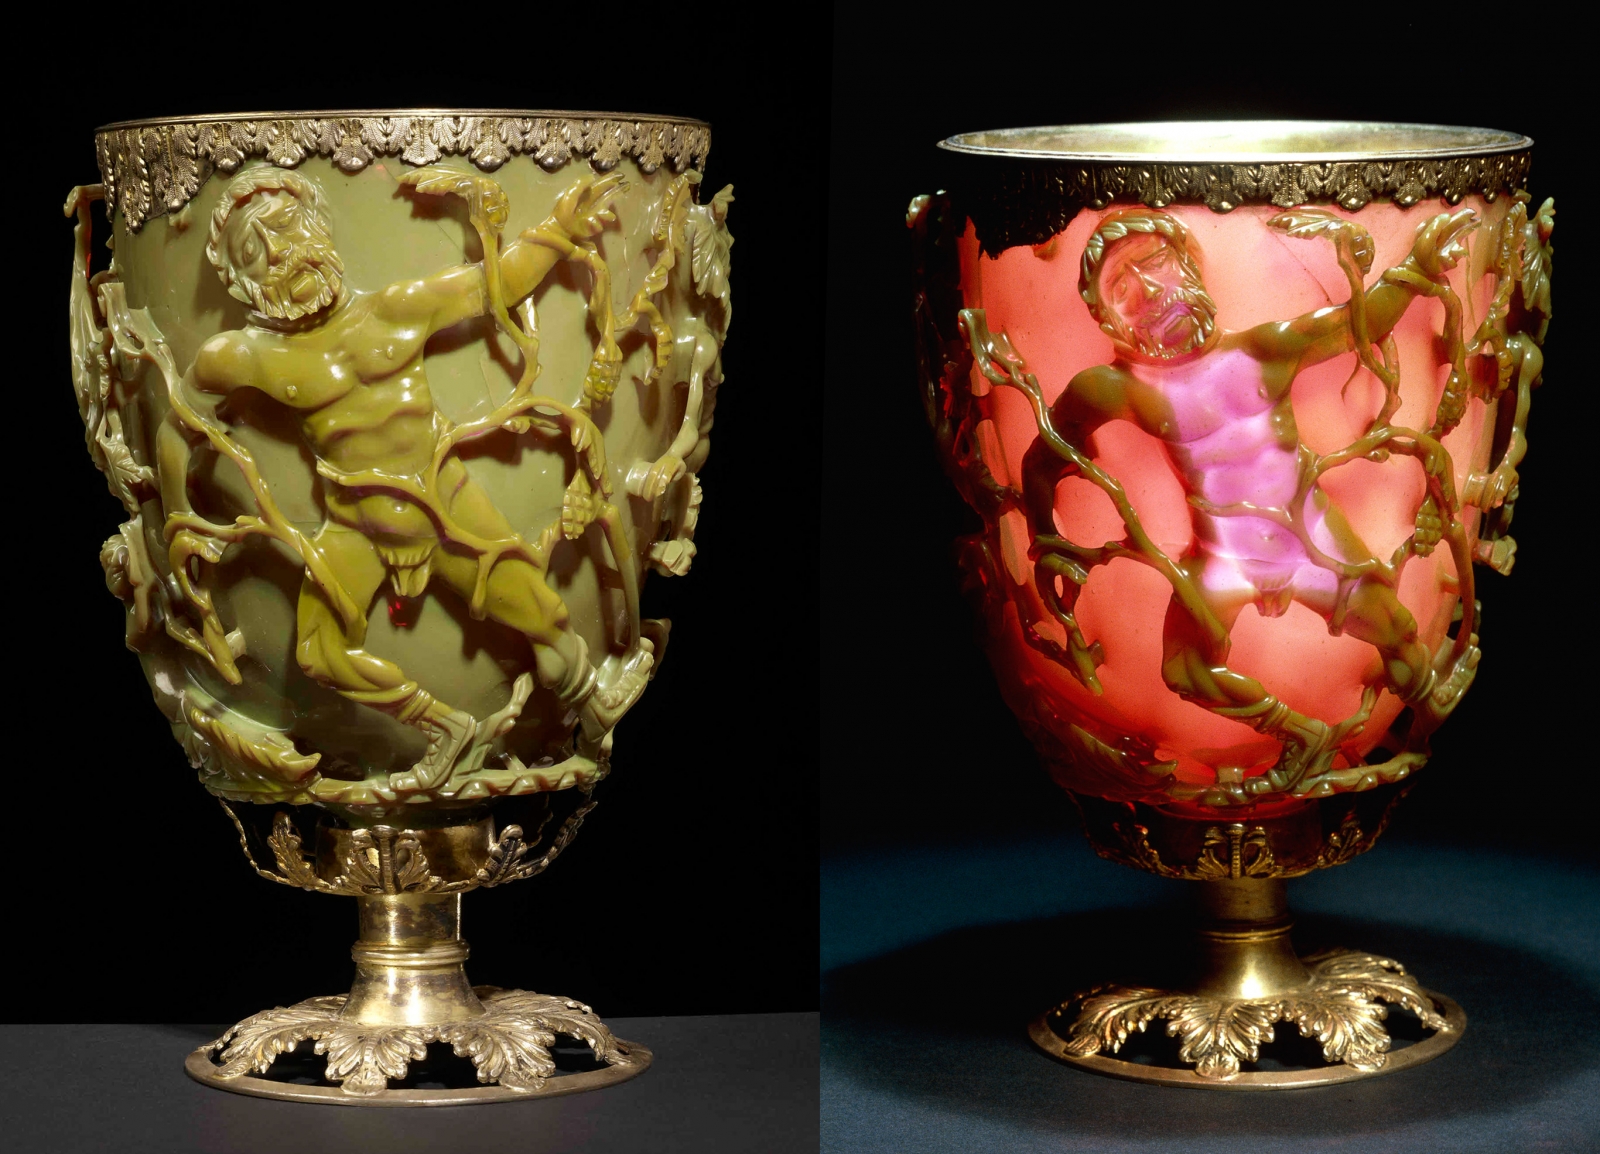 Romans Used Nanotechnology to Turn Lycurgus Cup From Green to Red 1,600 Years Ago1600 x 1154